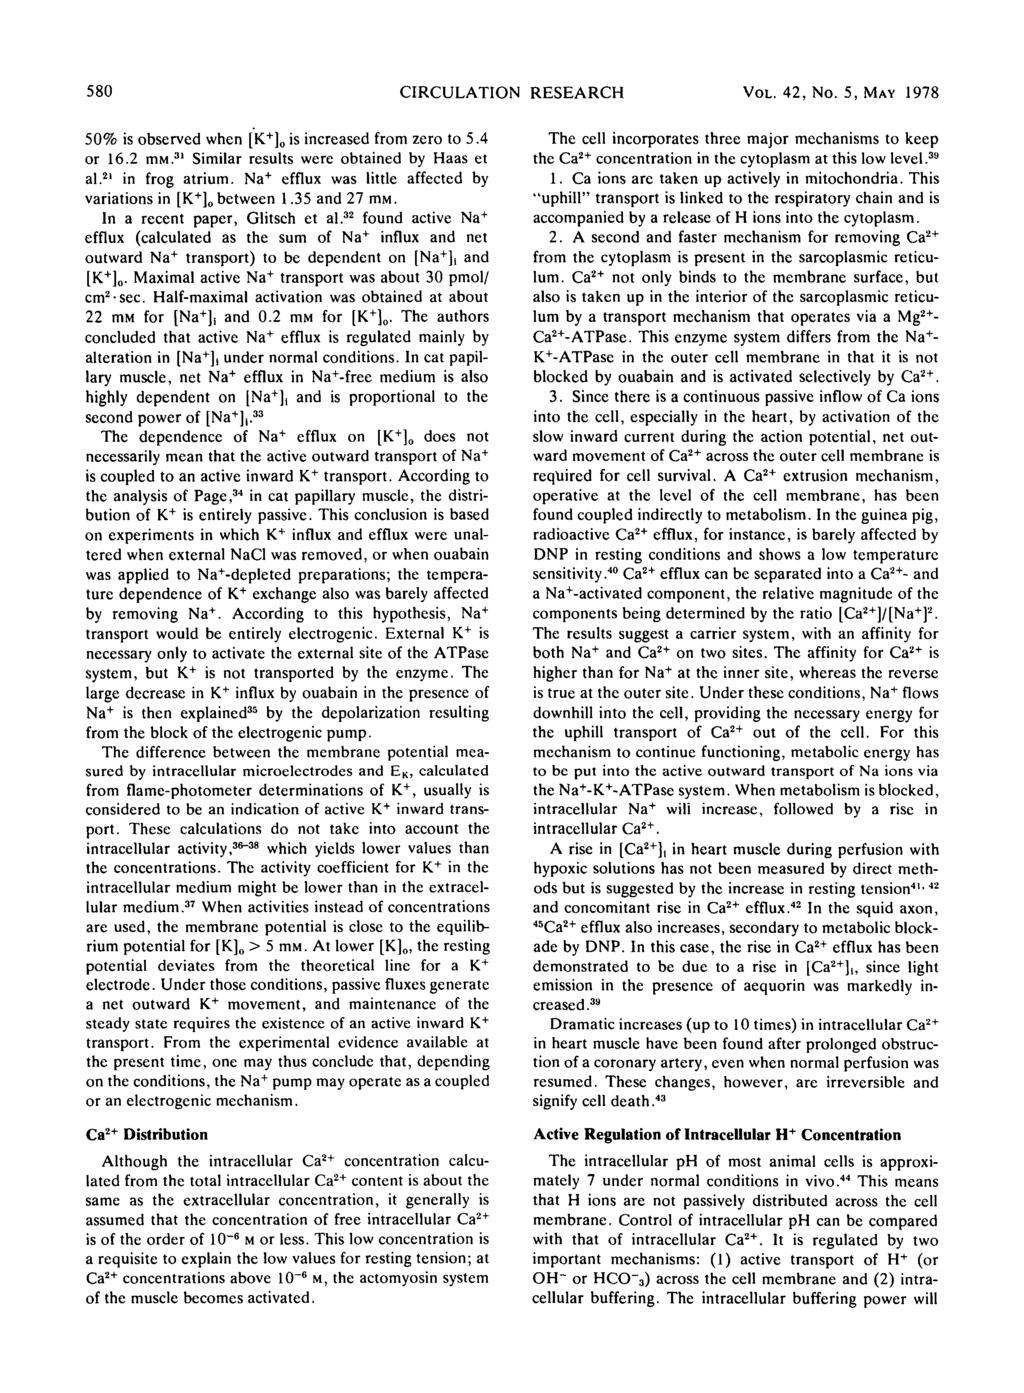 580 CIRCULATION RESEARCH VOL. 42, No. 5, MAY 1978 50% is observed when [K + ] o is increased from zero to 5.4 or 16.2 mm. 31 Similar results were obtained by Haas et al. 21 in frog atrium.